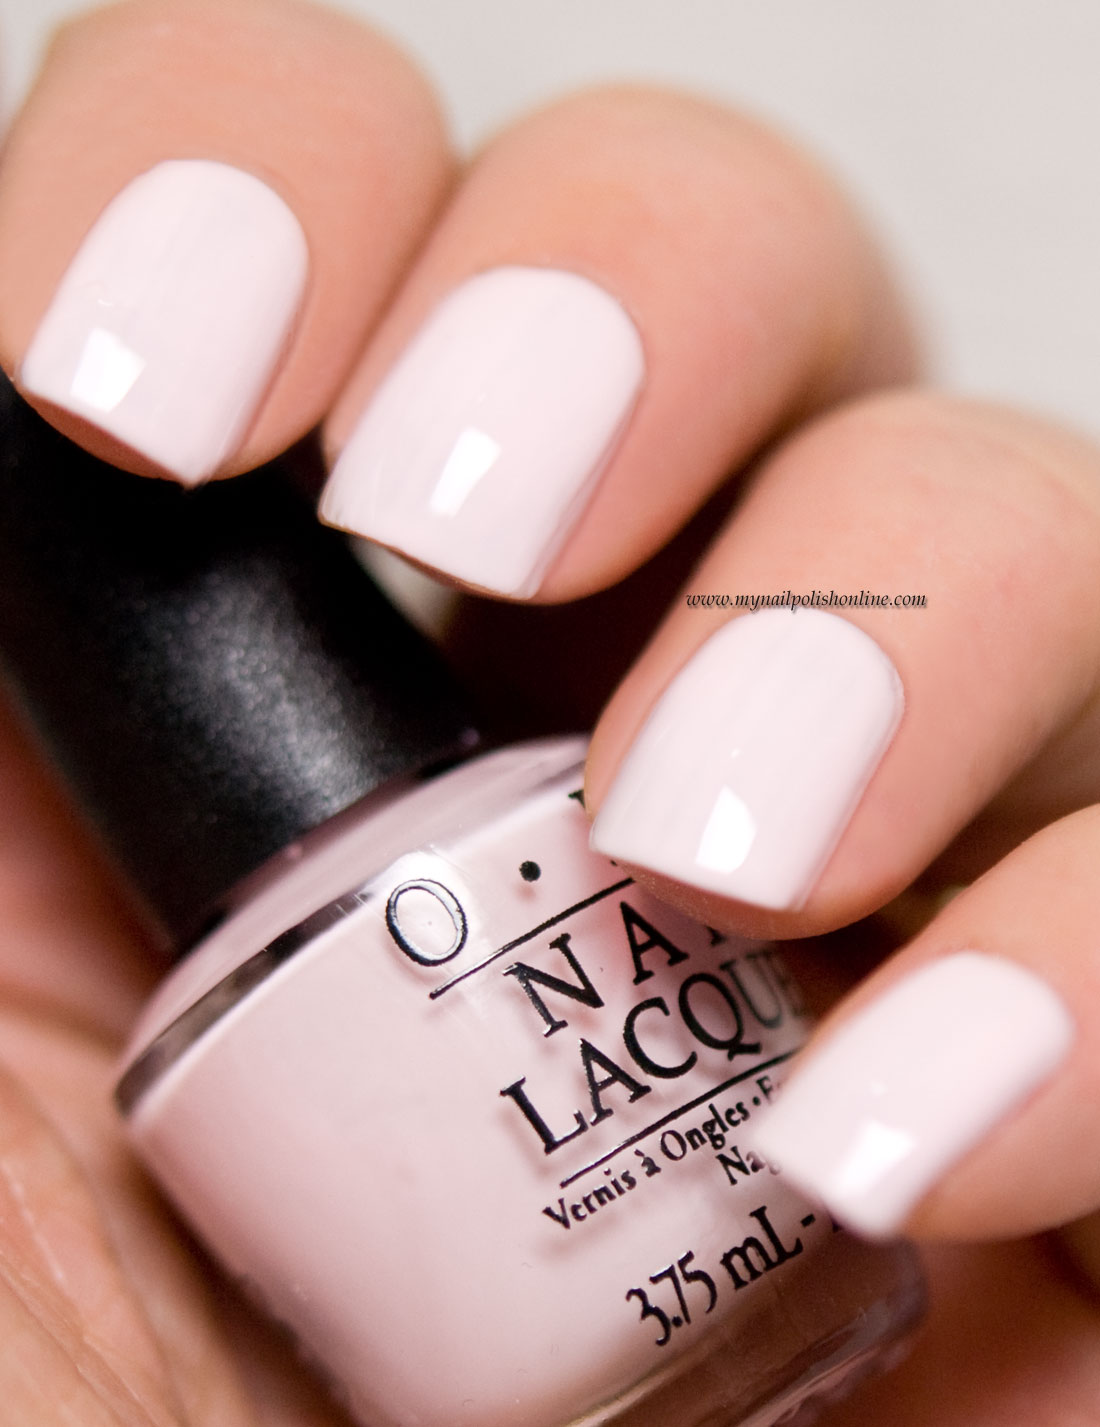 OPI - Let's be friends